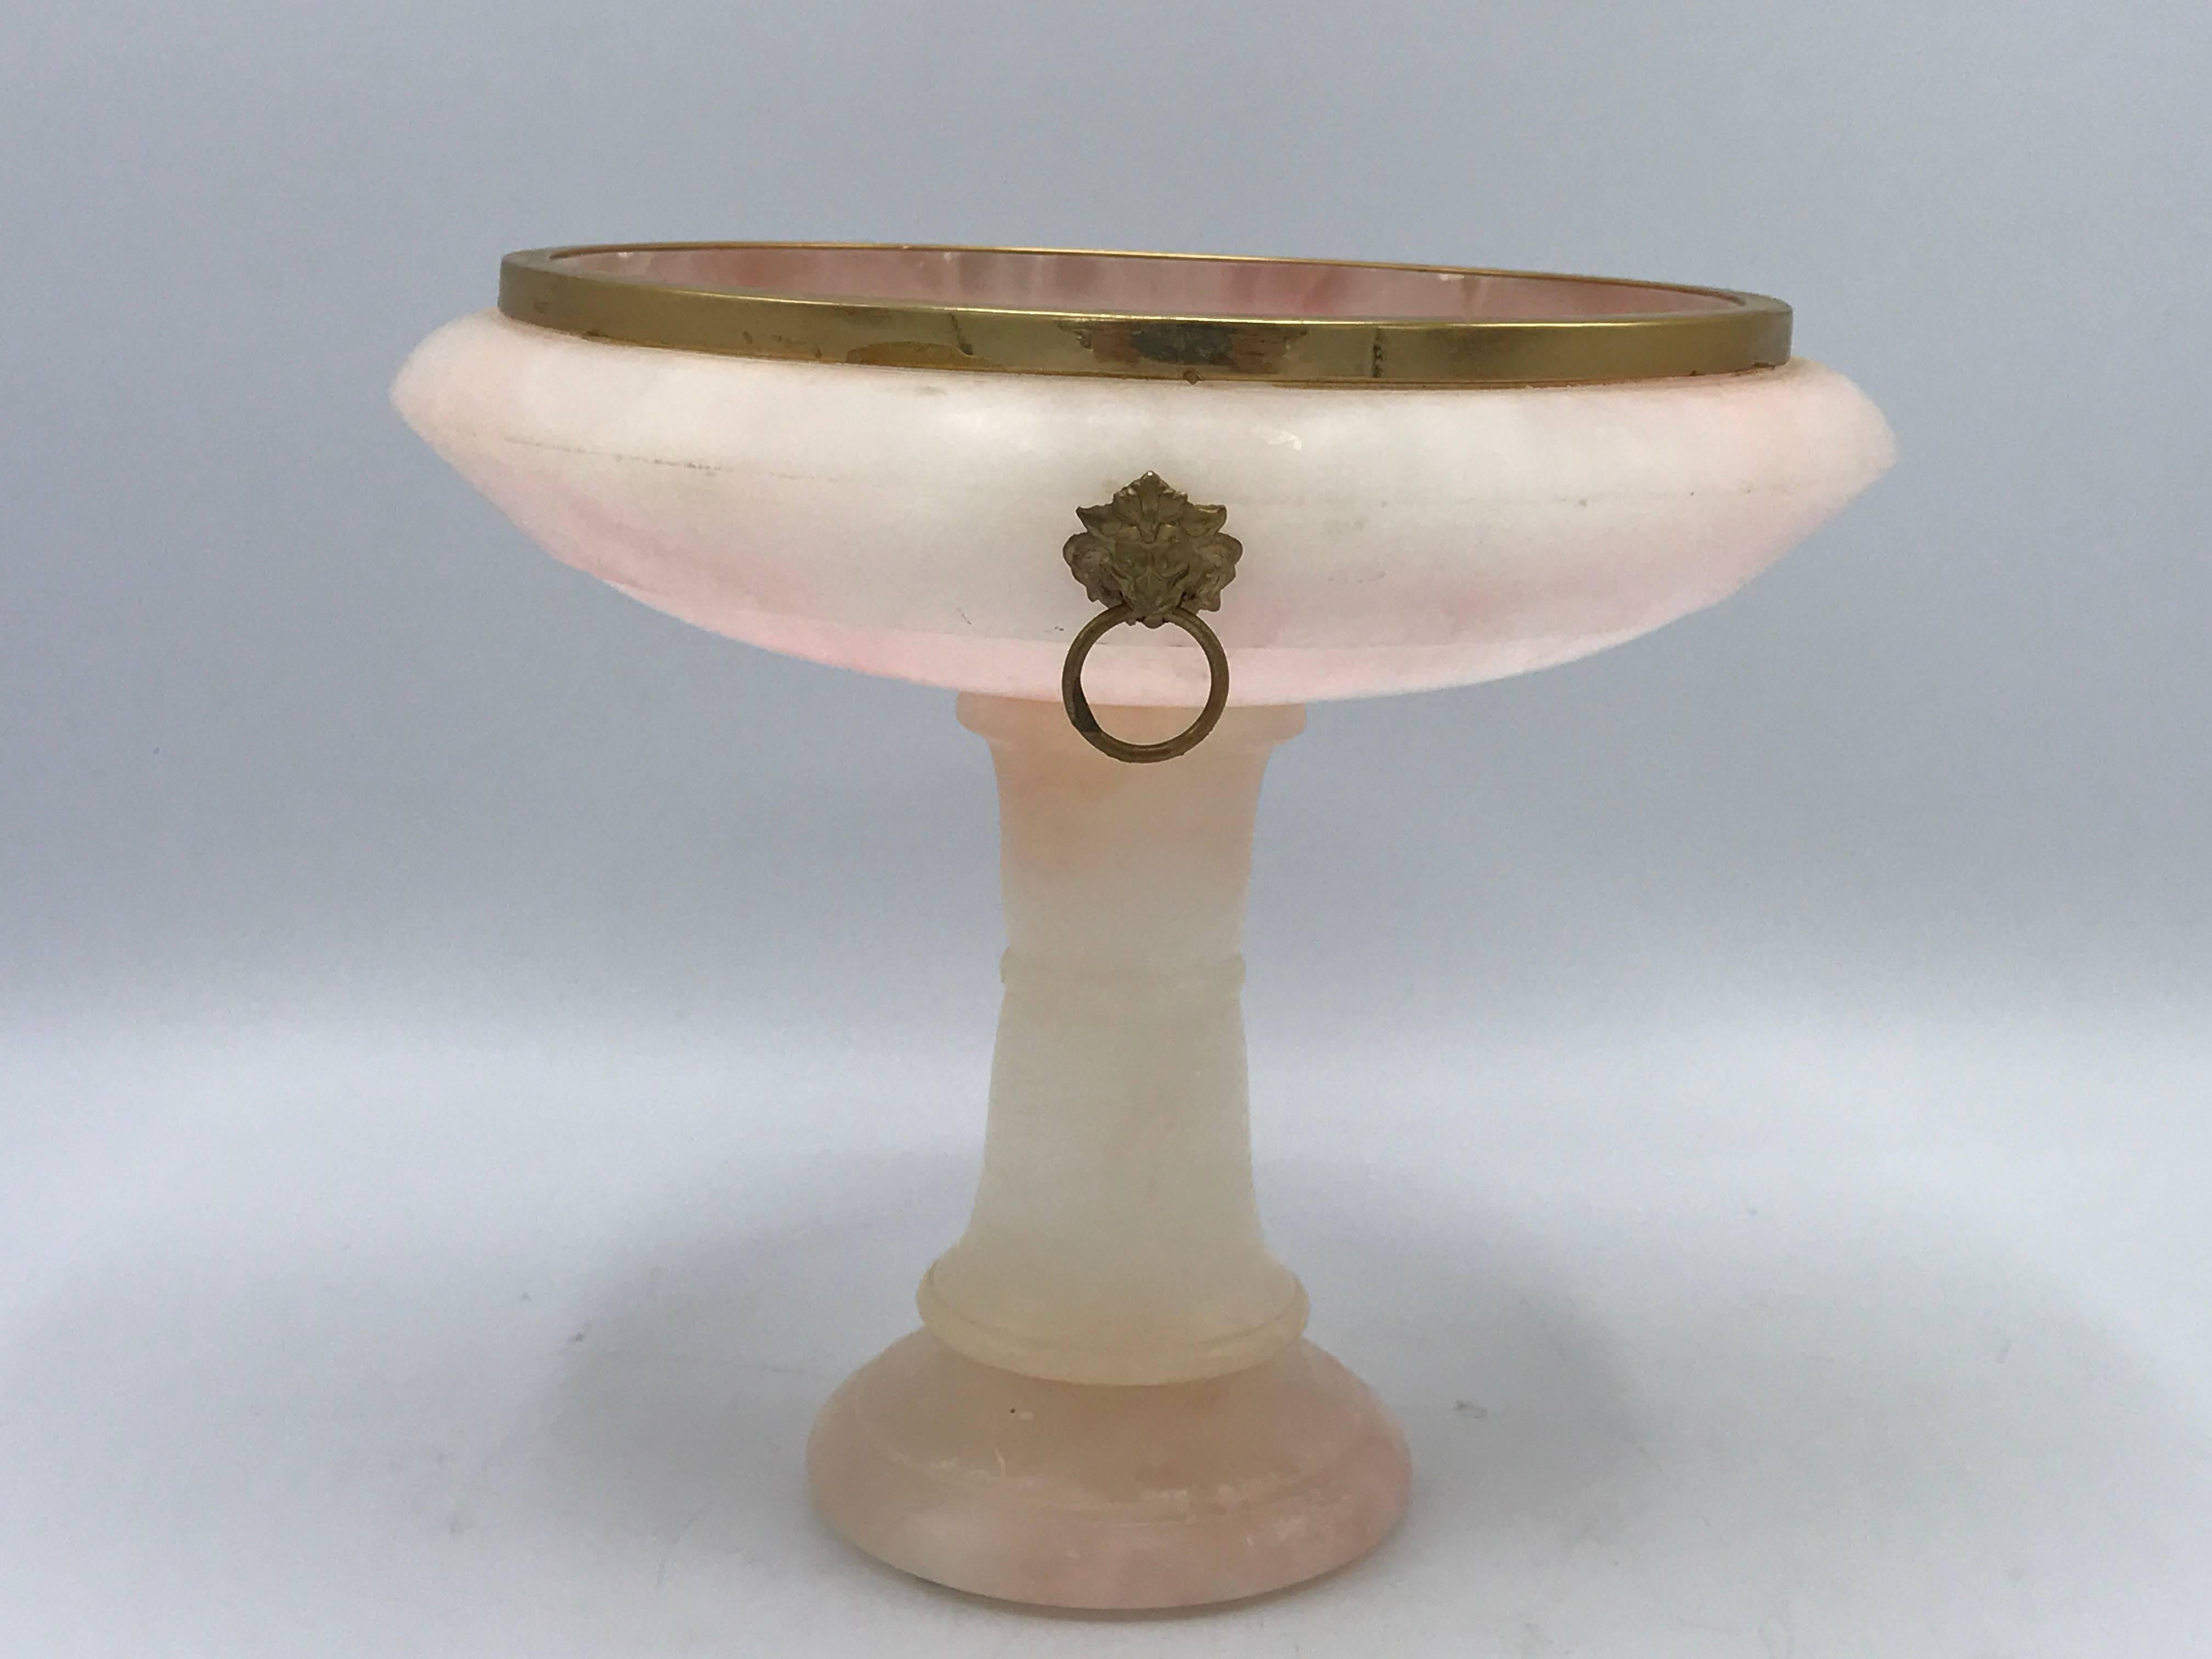 Offered is a fabulous, 1930s Italian pink alabaster urn/bowl on a pedestal. The piece has brass lion head handles and a brass border along the rim. Original sticker on bottom.